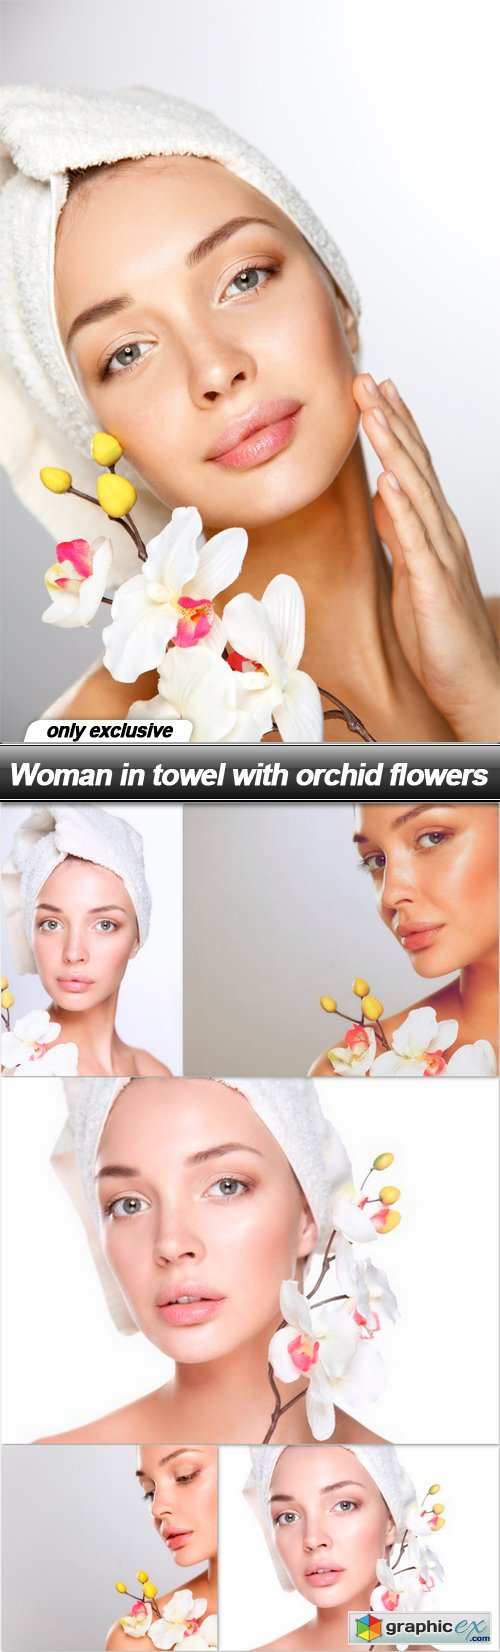 Woman in towel with orchid flowers - 6 UHQ JPEG